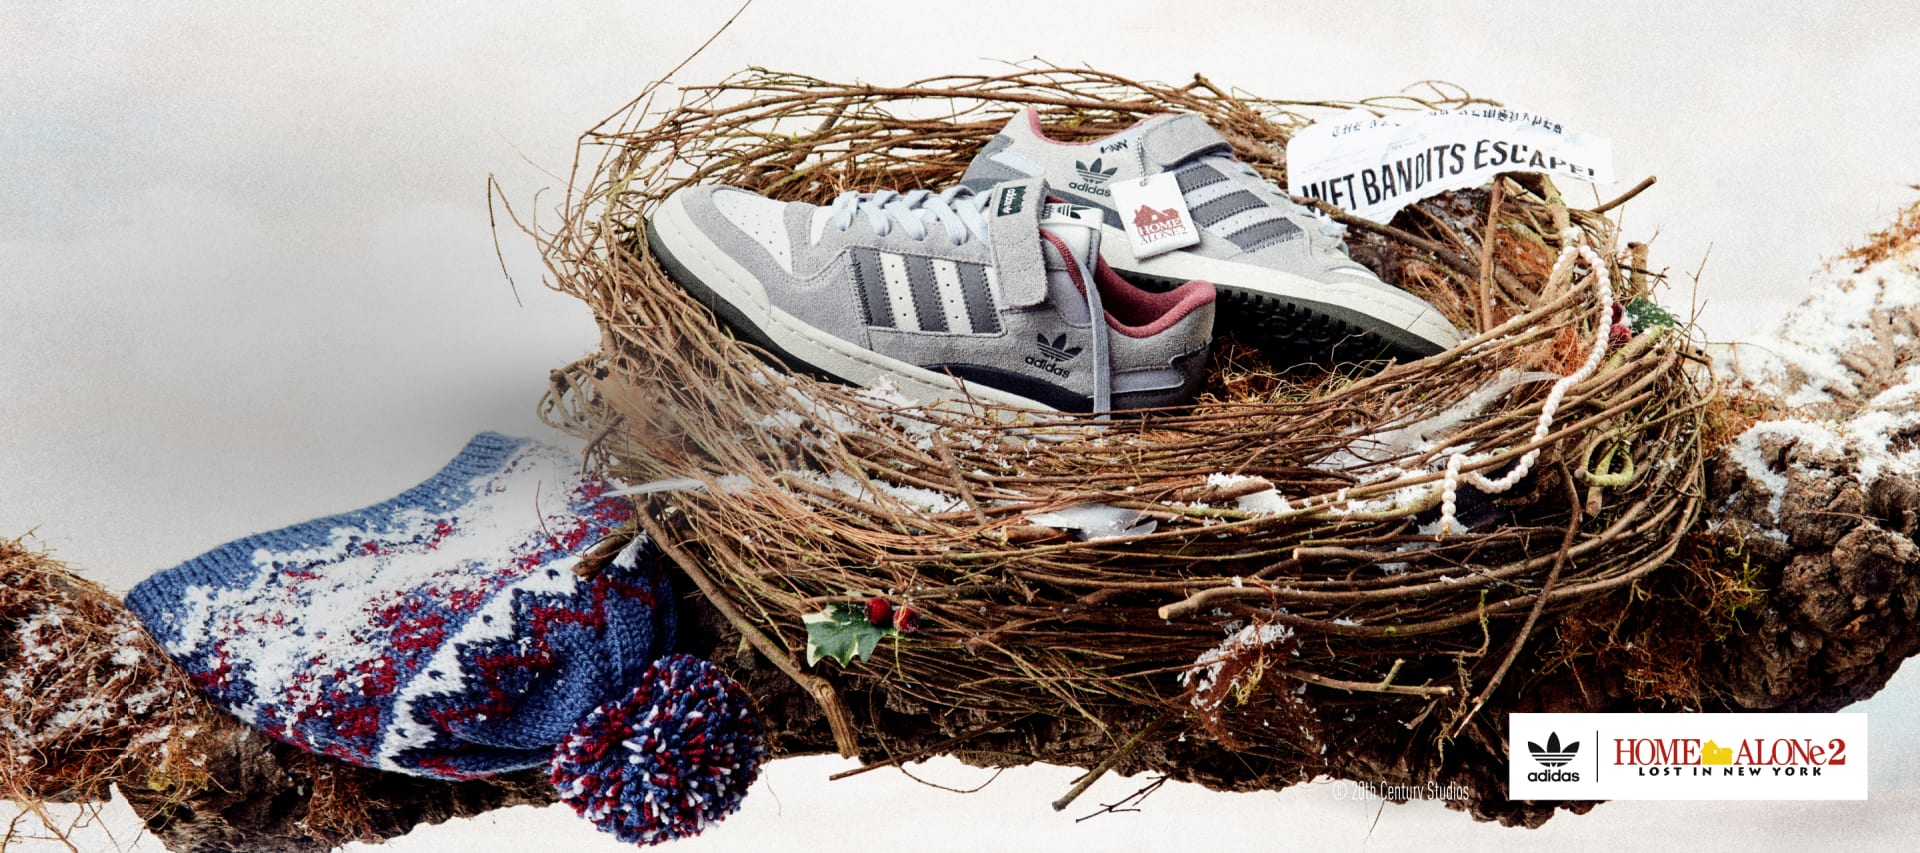 A pair of Forum Low Home Alone sneakers lie in a bird's nest on a snow-covered branch. Kevin's classic bobble hat lies next to it.